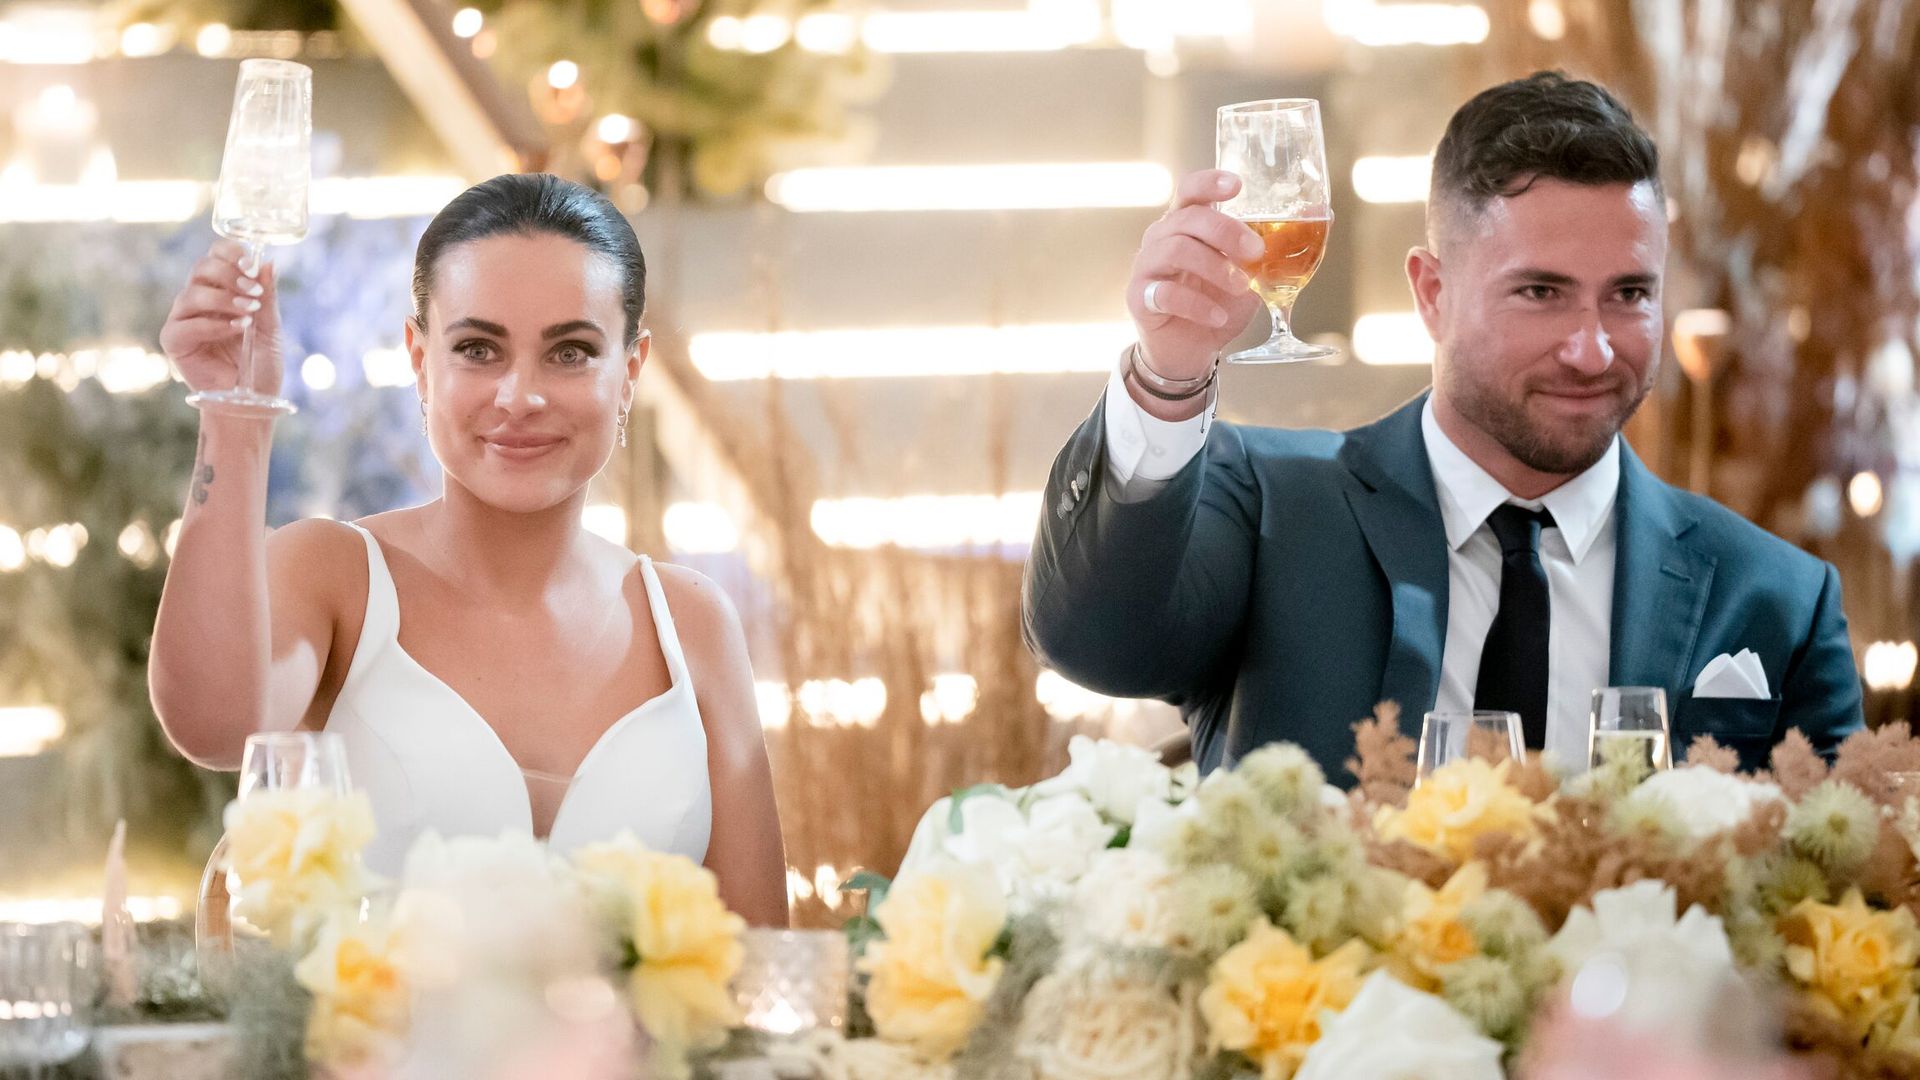 Bronte and Harrison raise glass at wedding